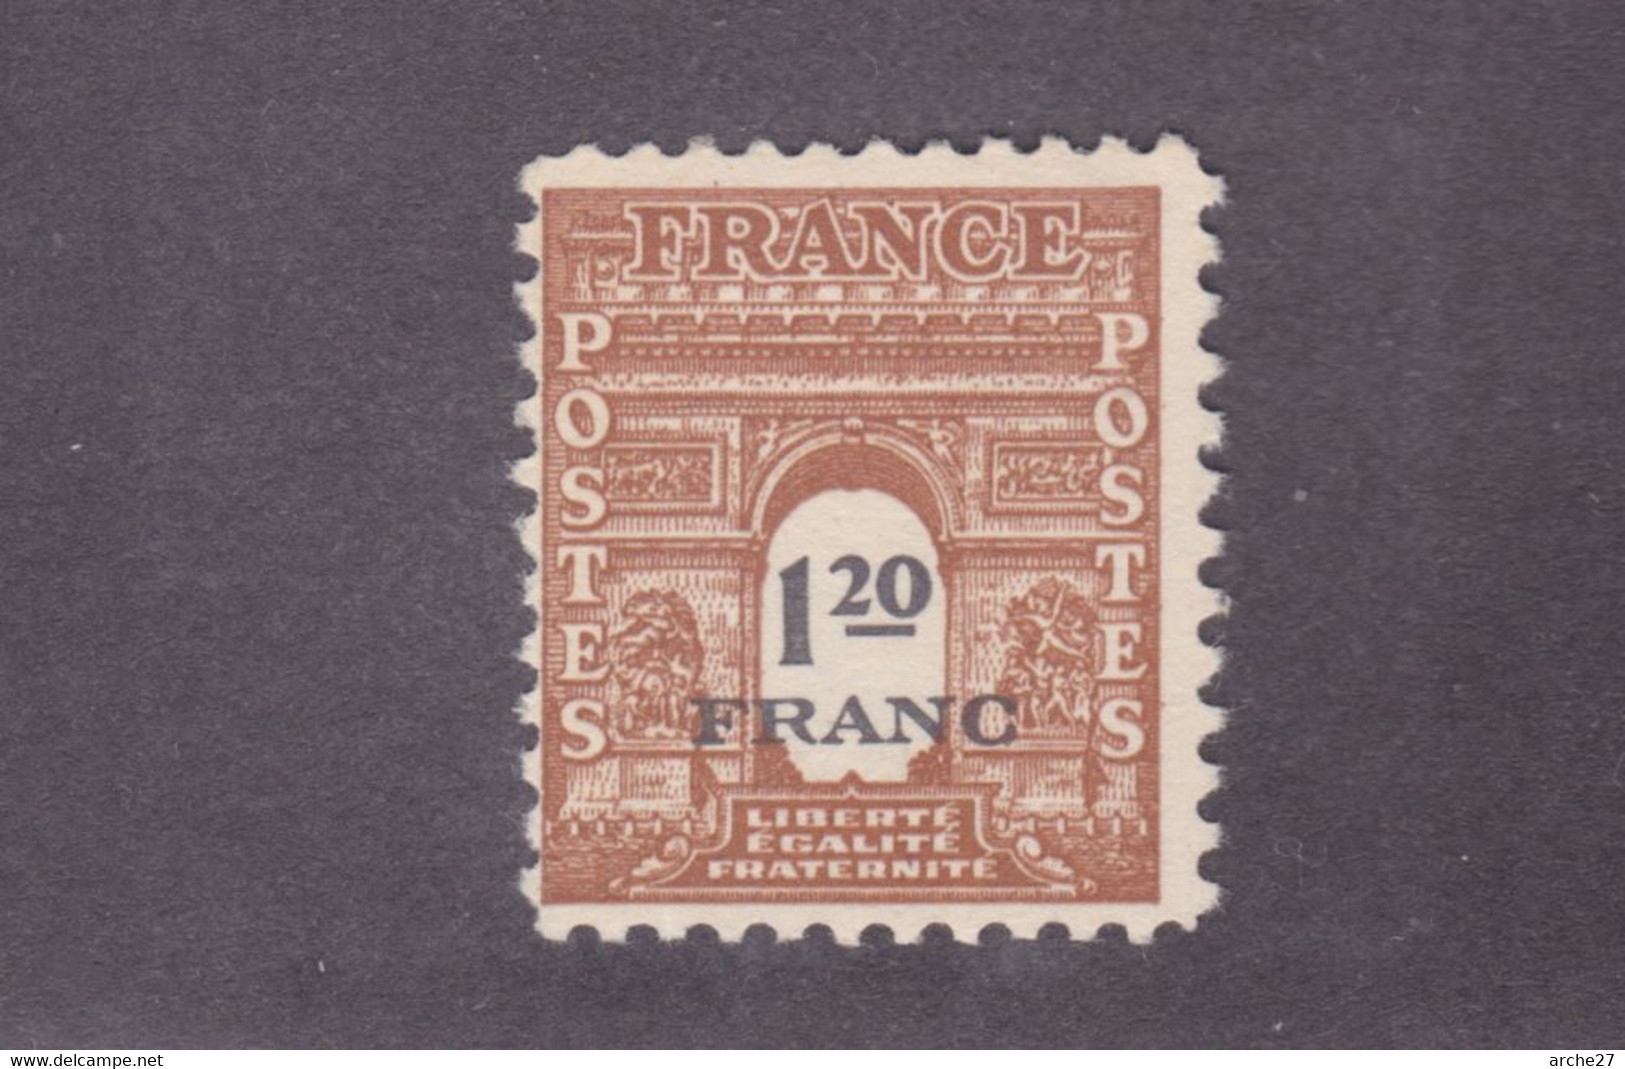 TIMBRE FRANCE N° 707 NEUF ** - Unused Stamps